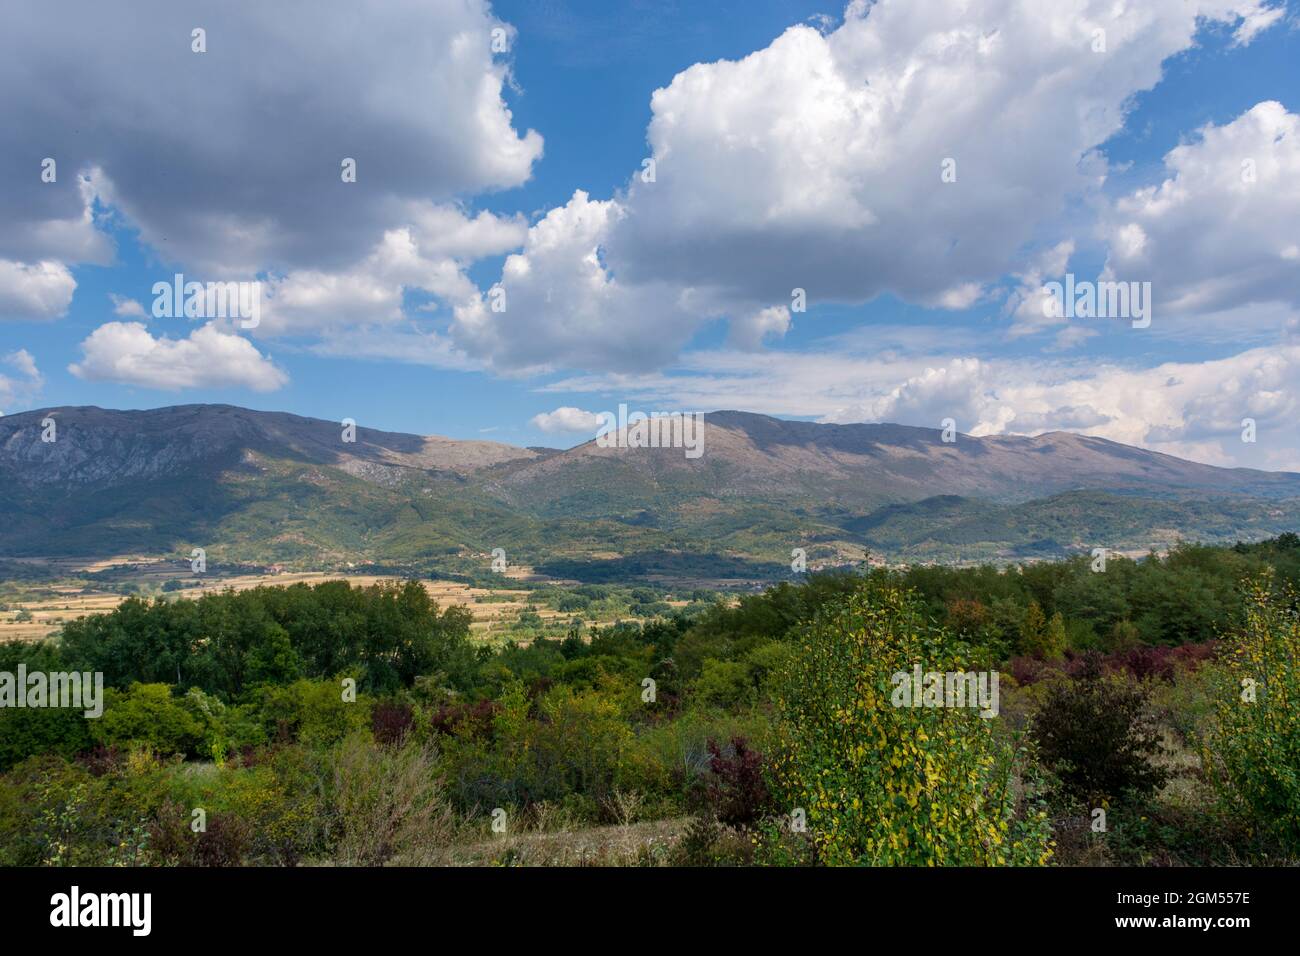 Landscape view of Suva Planina (The dry mountain) in Serbia on an autumn day. White clouds cast a shadow on the great mountain Stock Photo